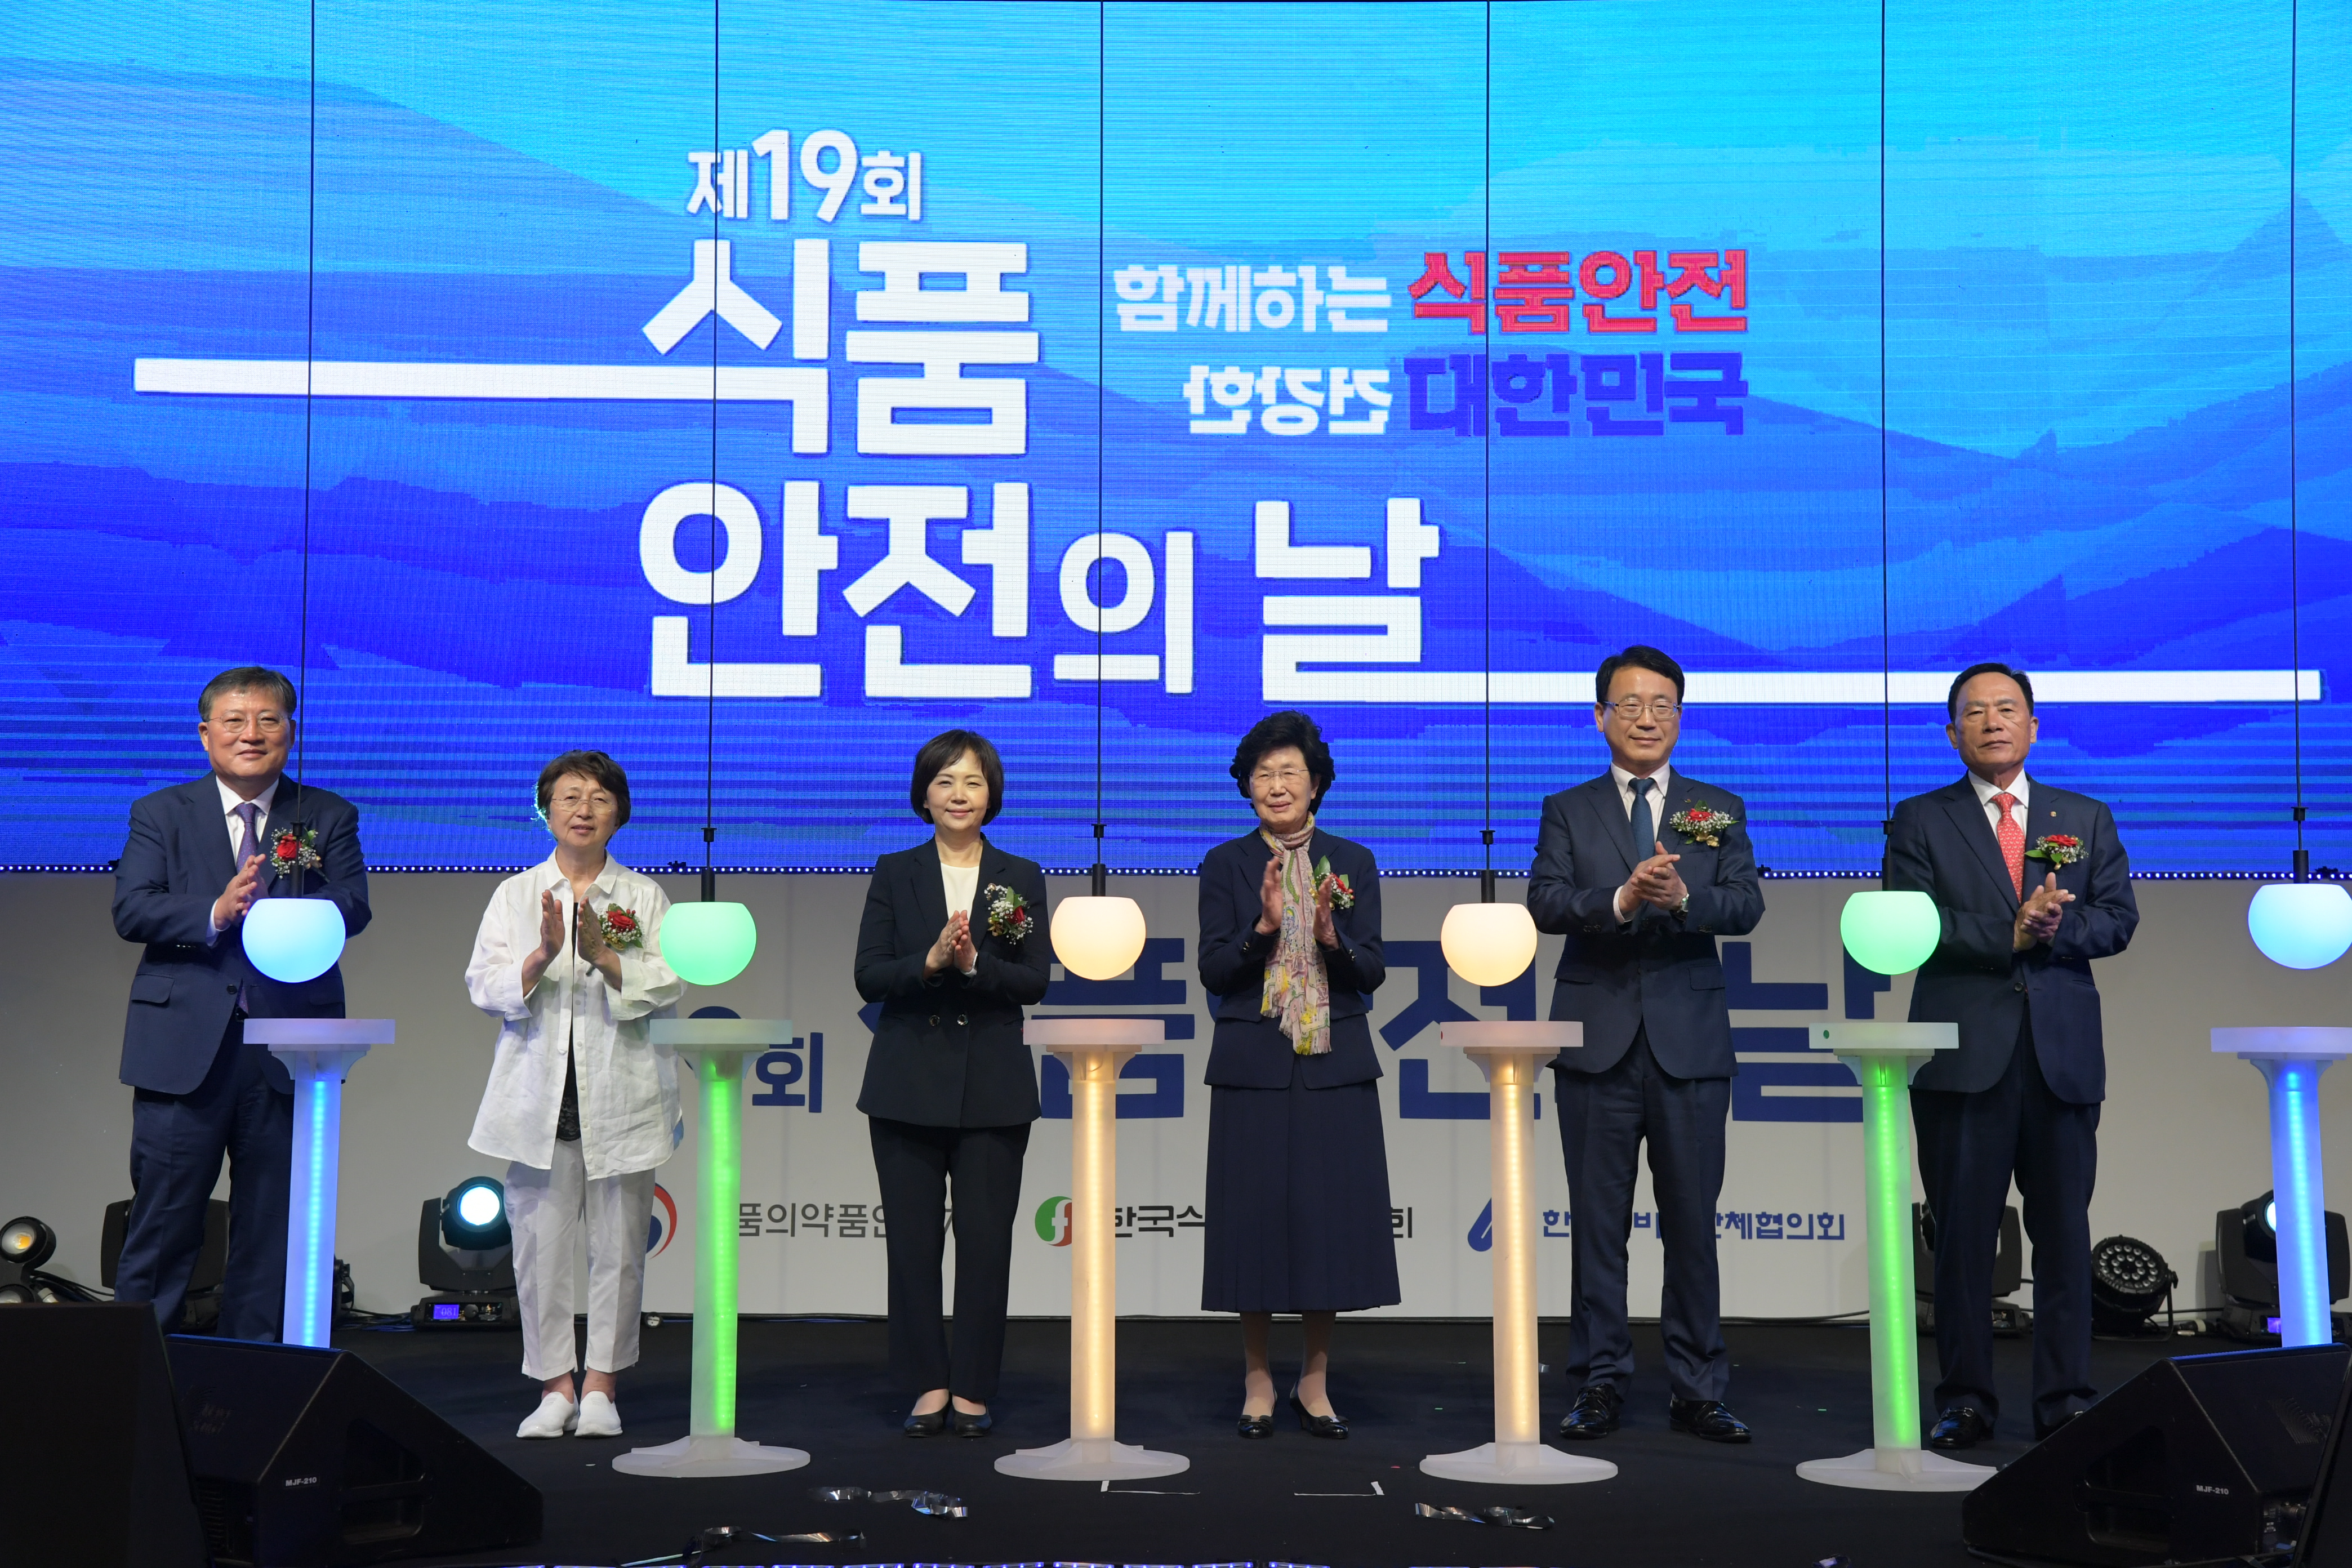 Photo News5 - [Jun. 15, 2020] Commemoration of the 19th Food Safety Day